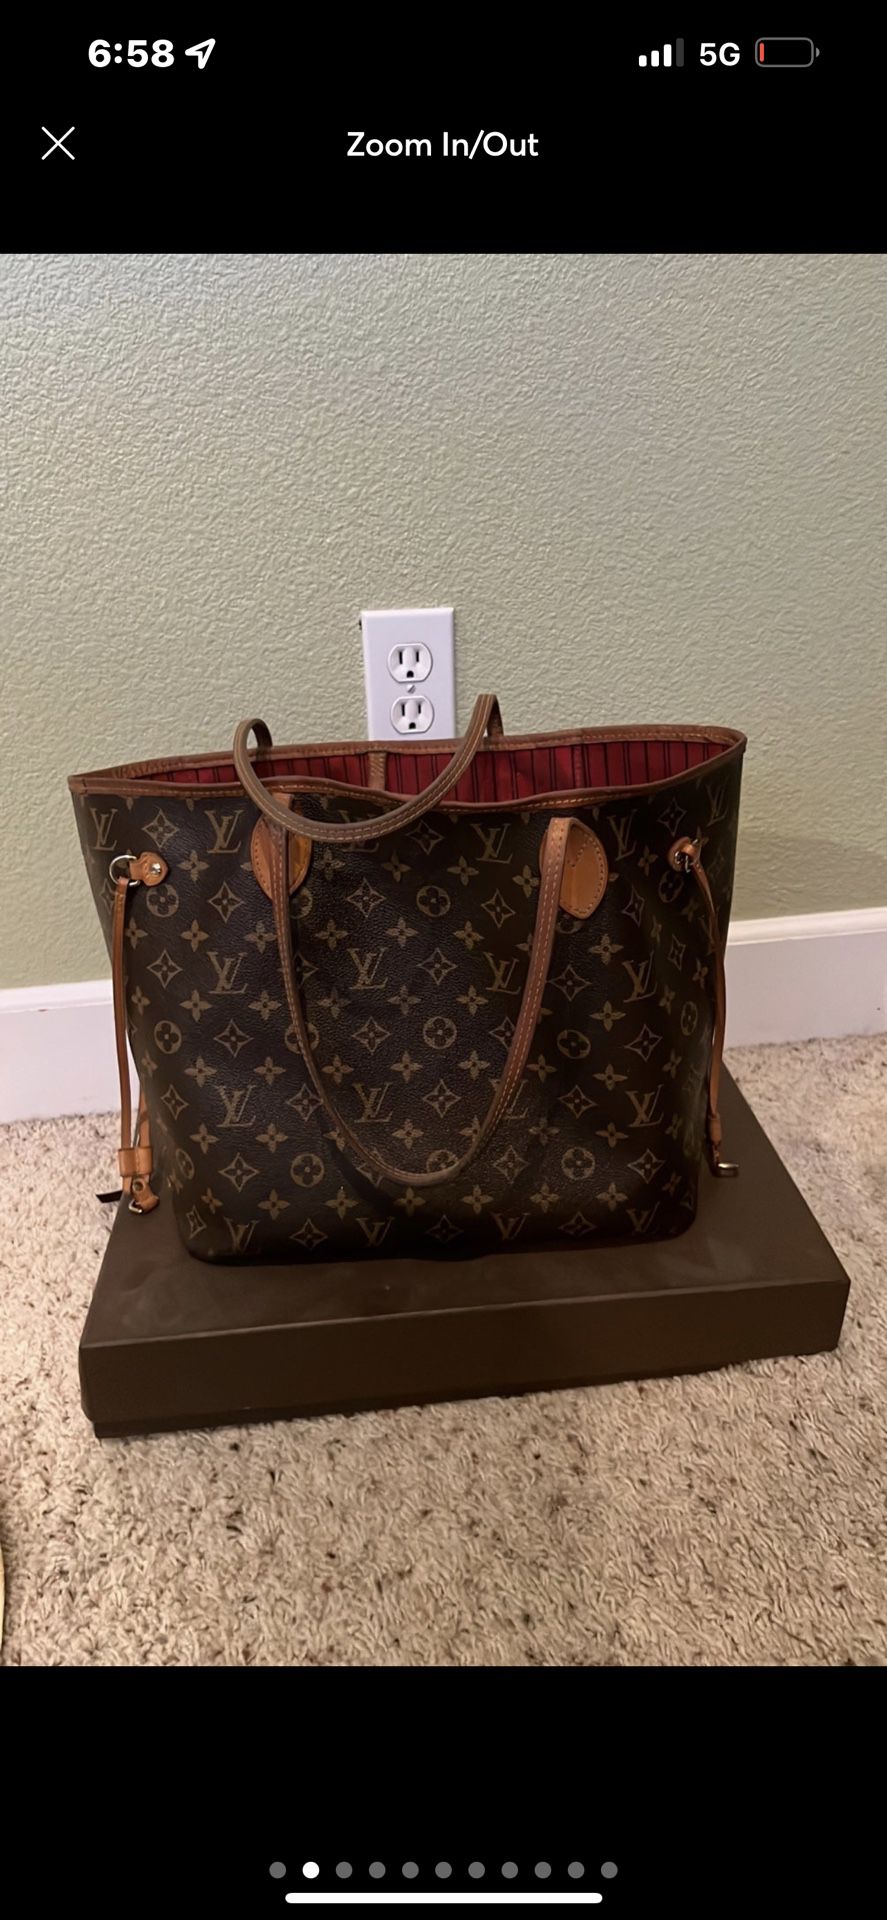 Authentic Louis Vuitton Neverfull MM for Sale in Reno, NV - OfferUp